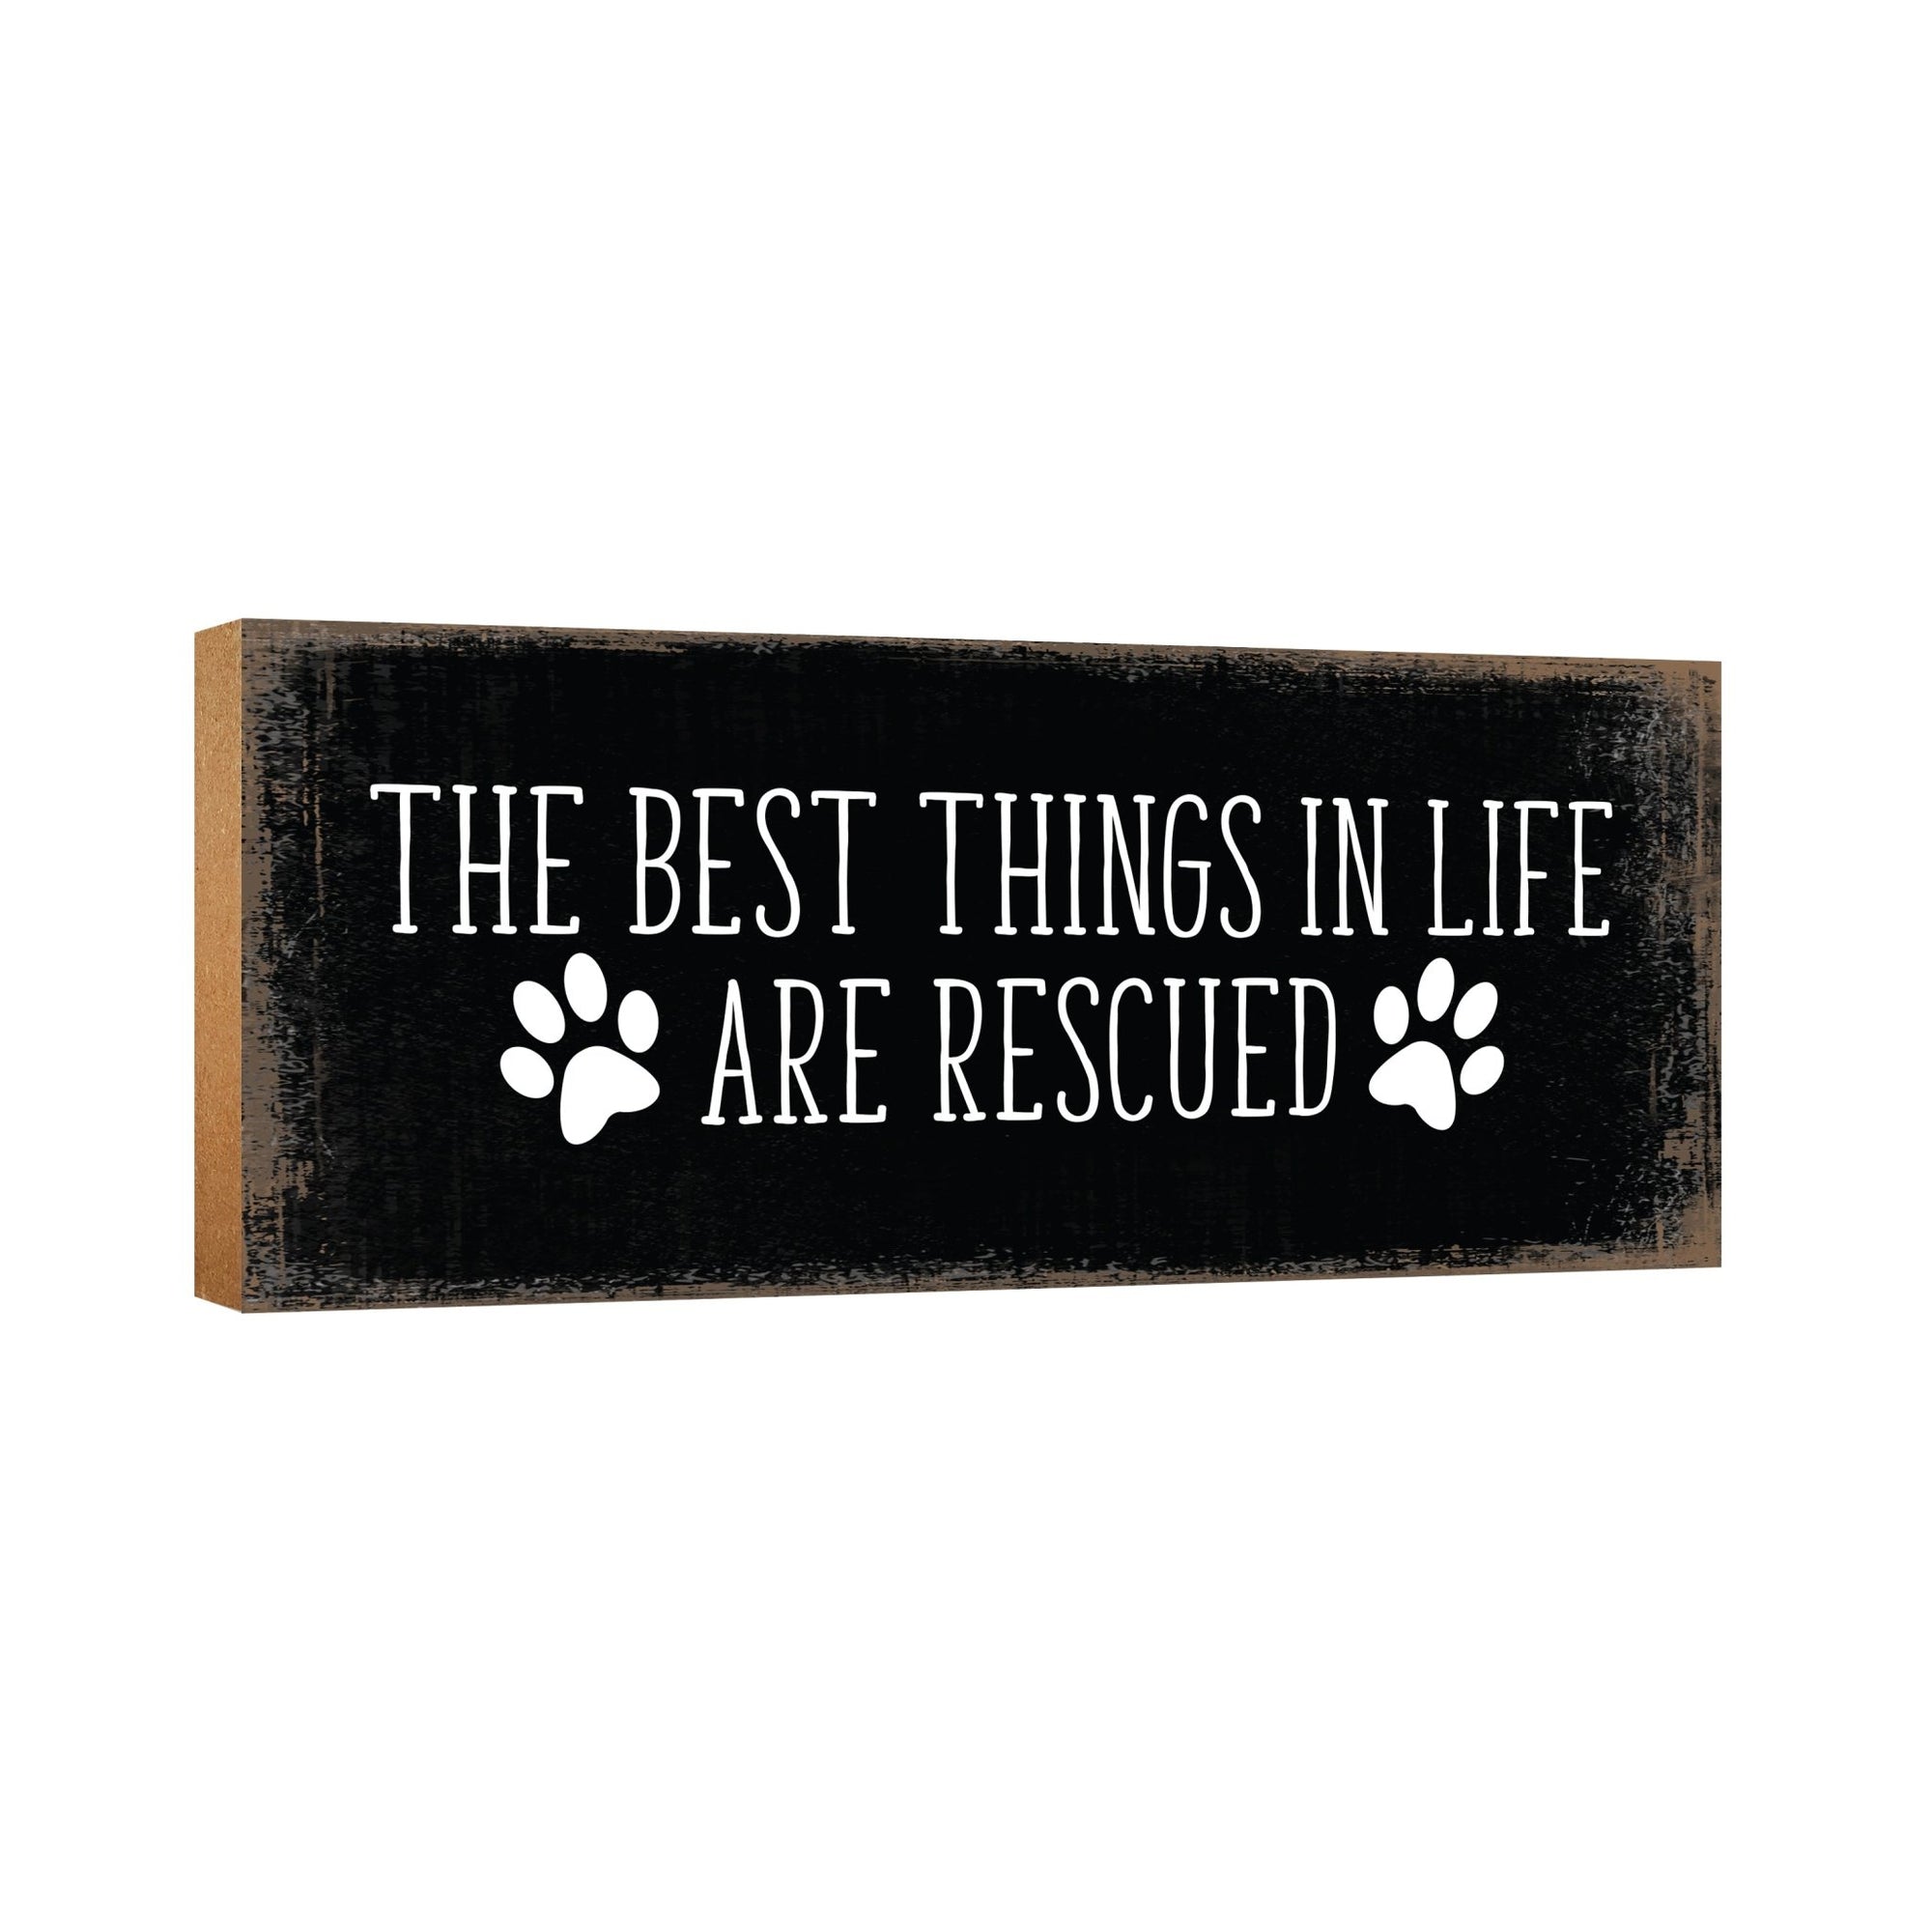 Modern Inspirational Pet Memorial 4x10 inches Wooden Sign (Rescued) Tabletop Plaque Home Decoration Loss of Pet Bereavement Sympathy Keepsake - LifeSong Milestones